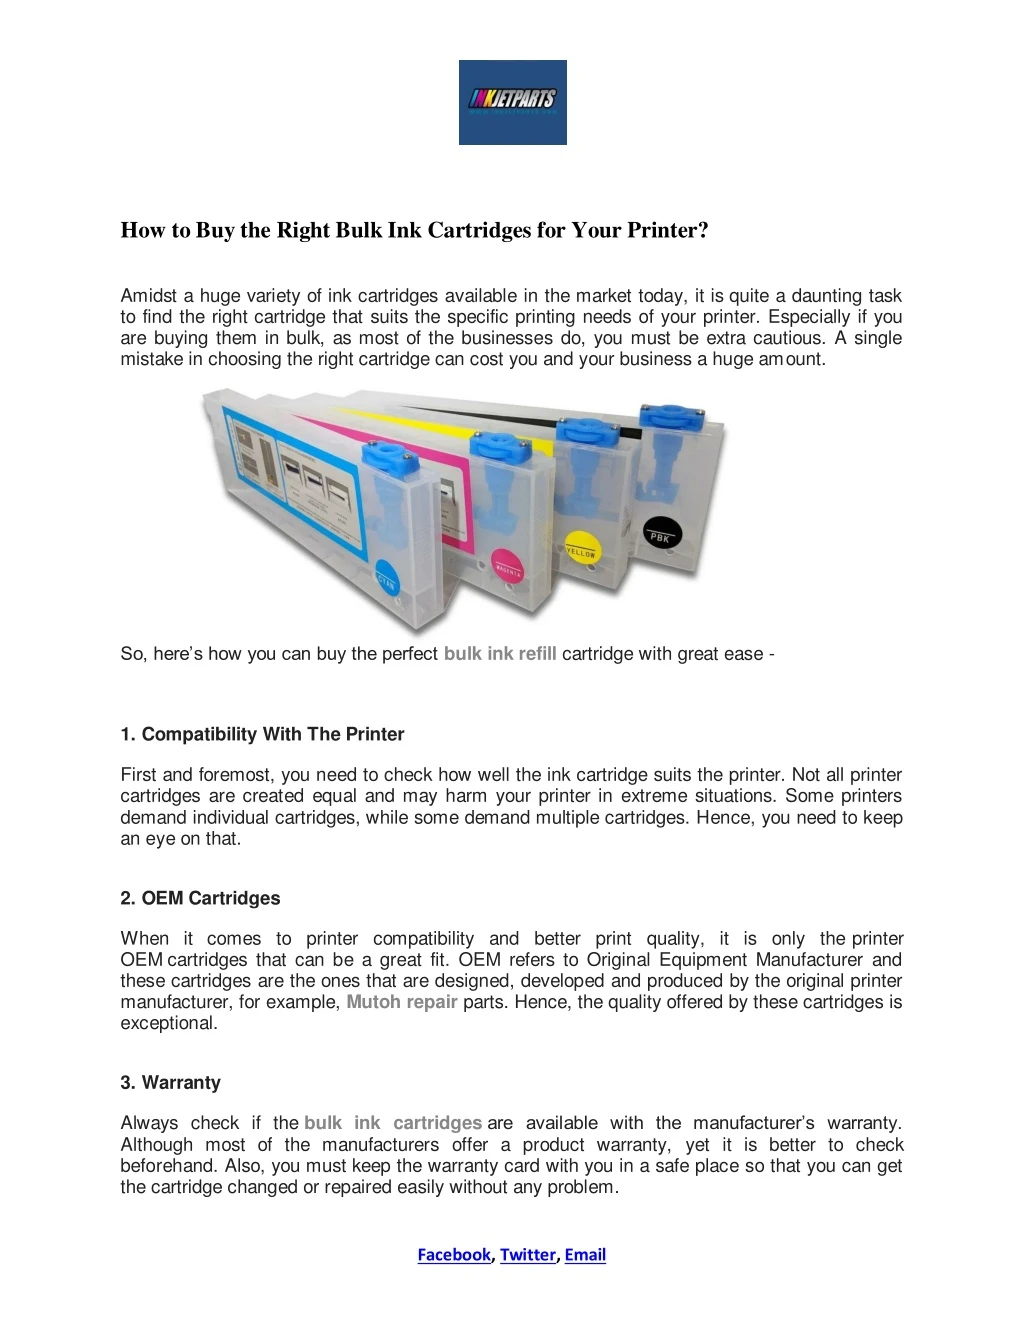 how to buy the right bulk ink cartridges for your